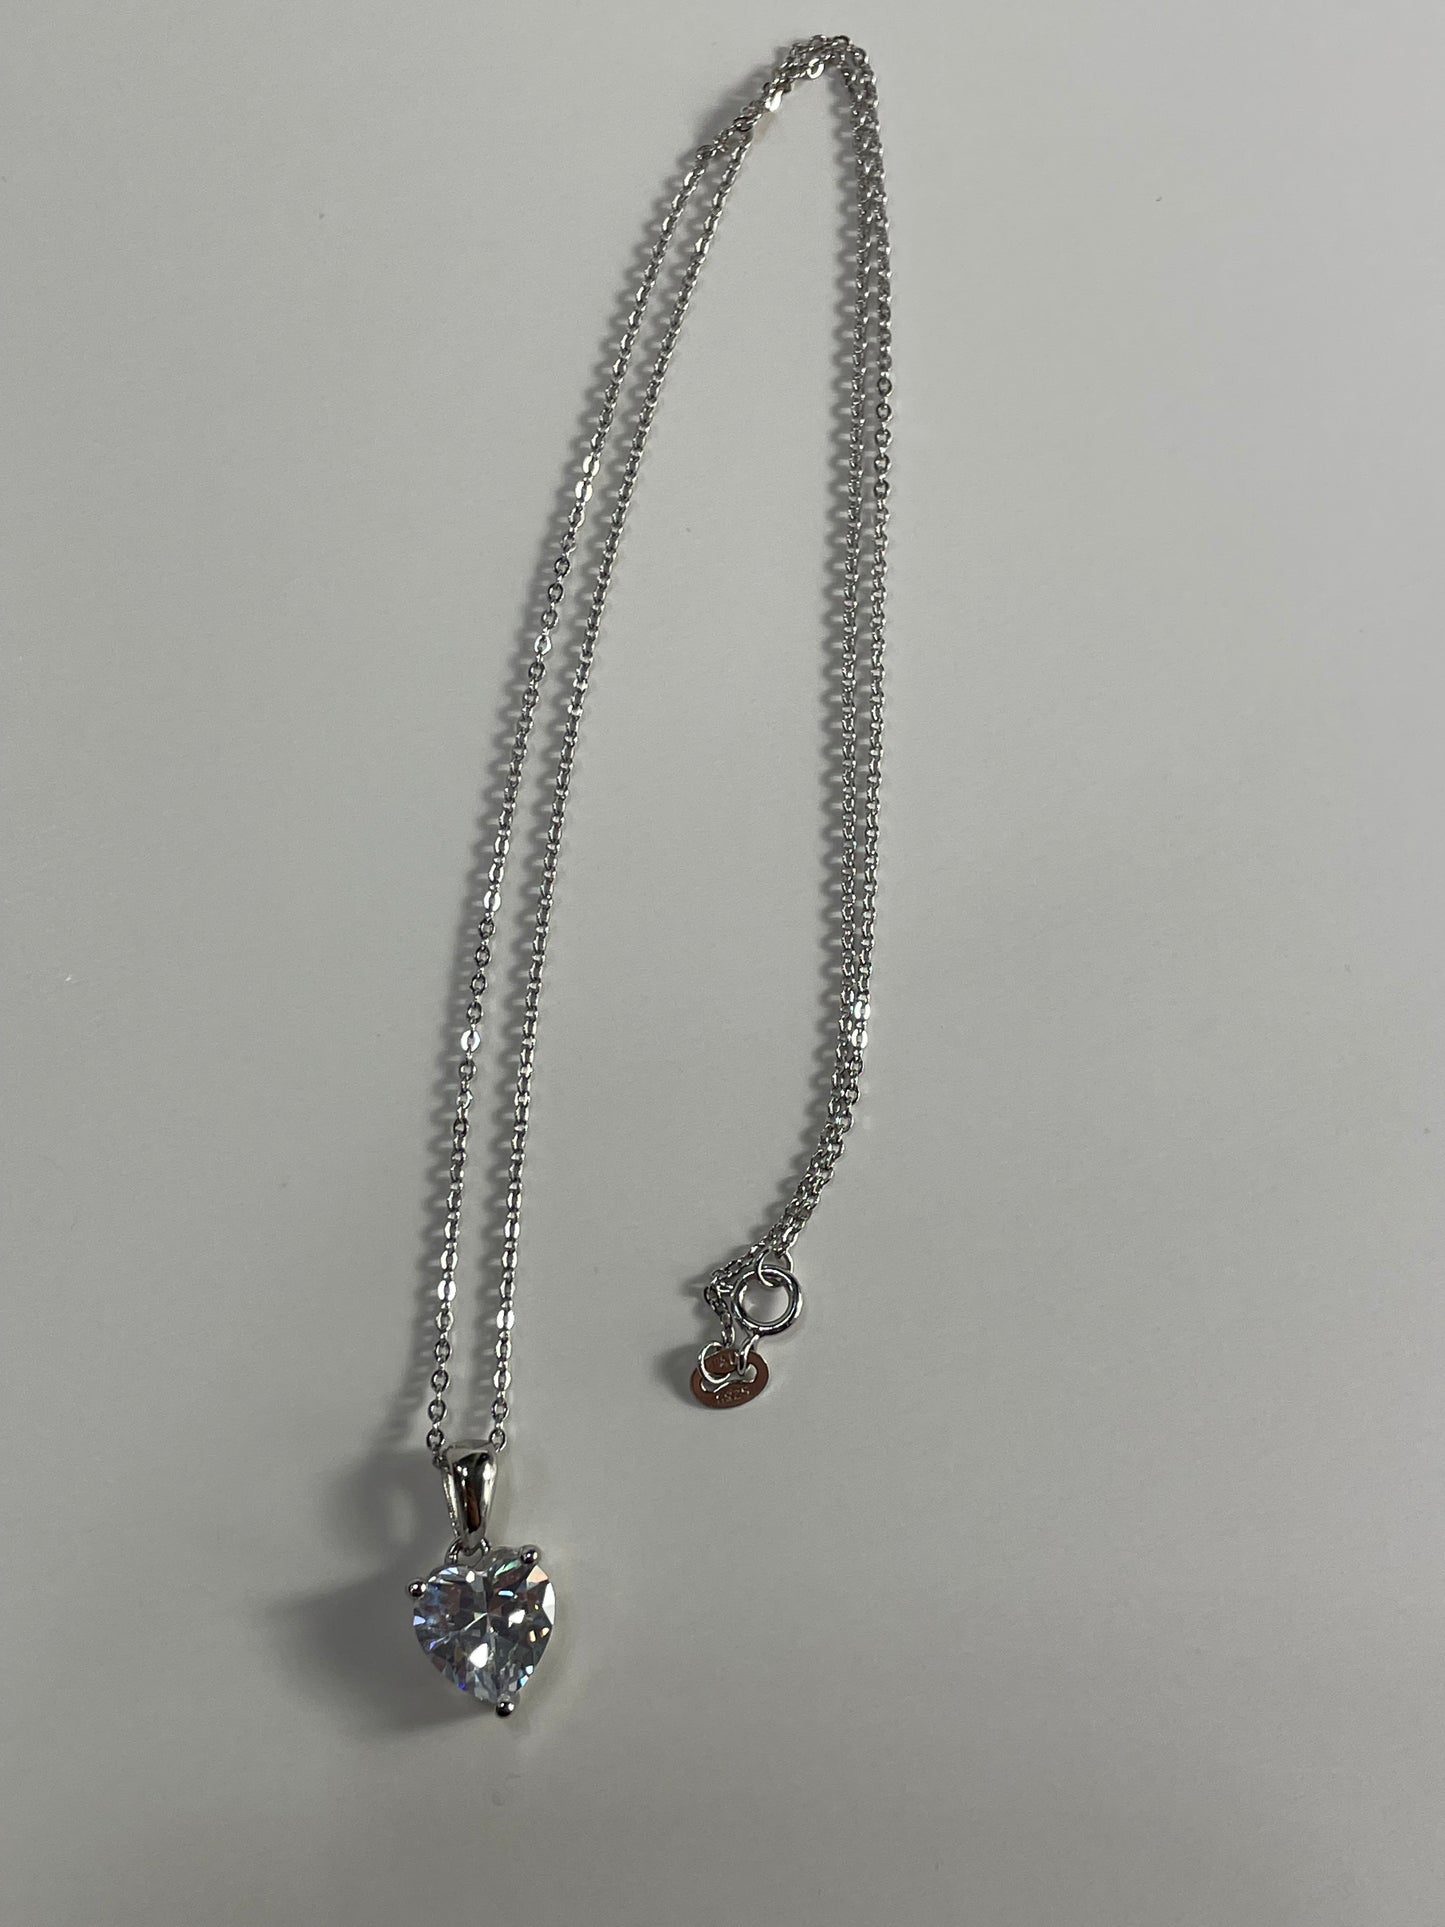 Sterling Silver Necklace with CLEAR Cubic Zirconia Heart Pendant